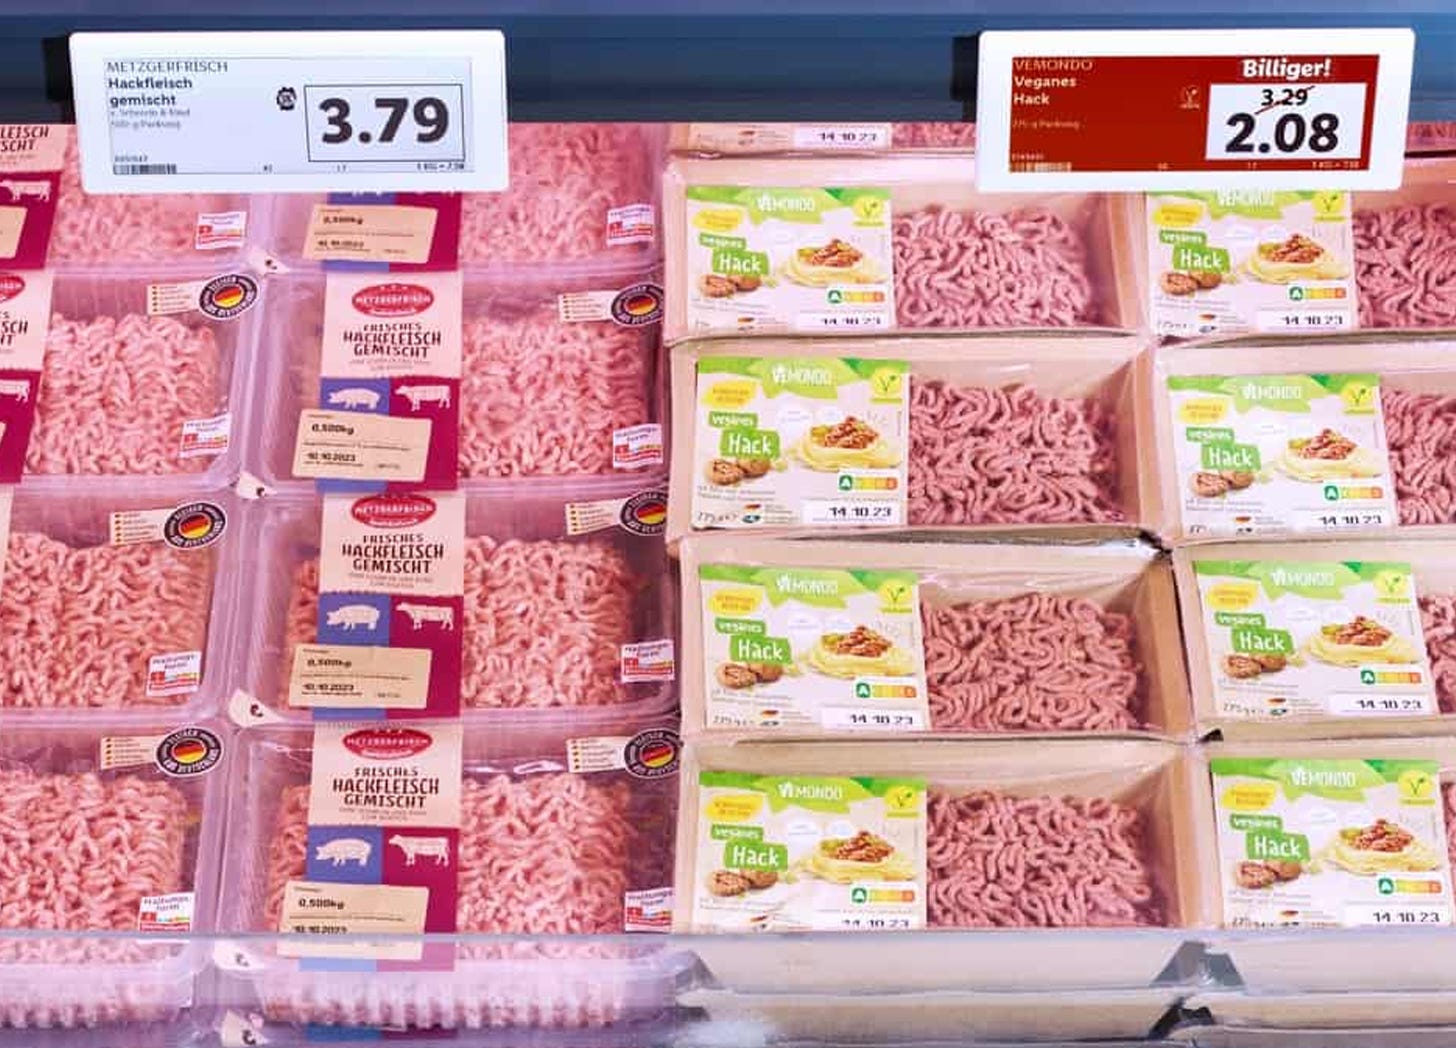 Slaughter-based and plant-based meat mince placed side by side, with a 3.79 price tag above the former and a 2.09 price tag placed above the latter